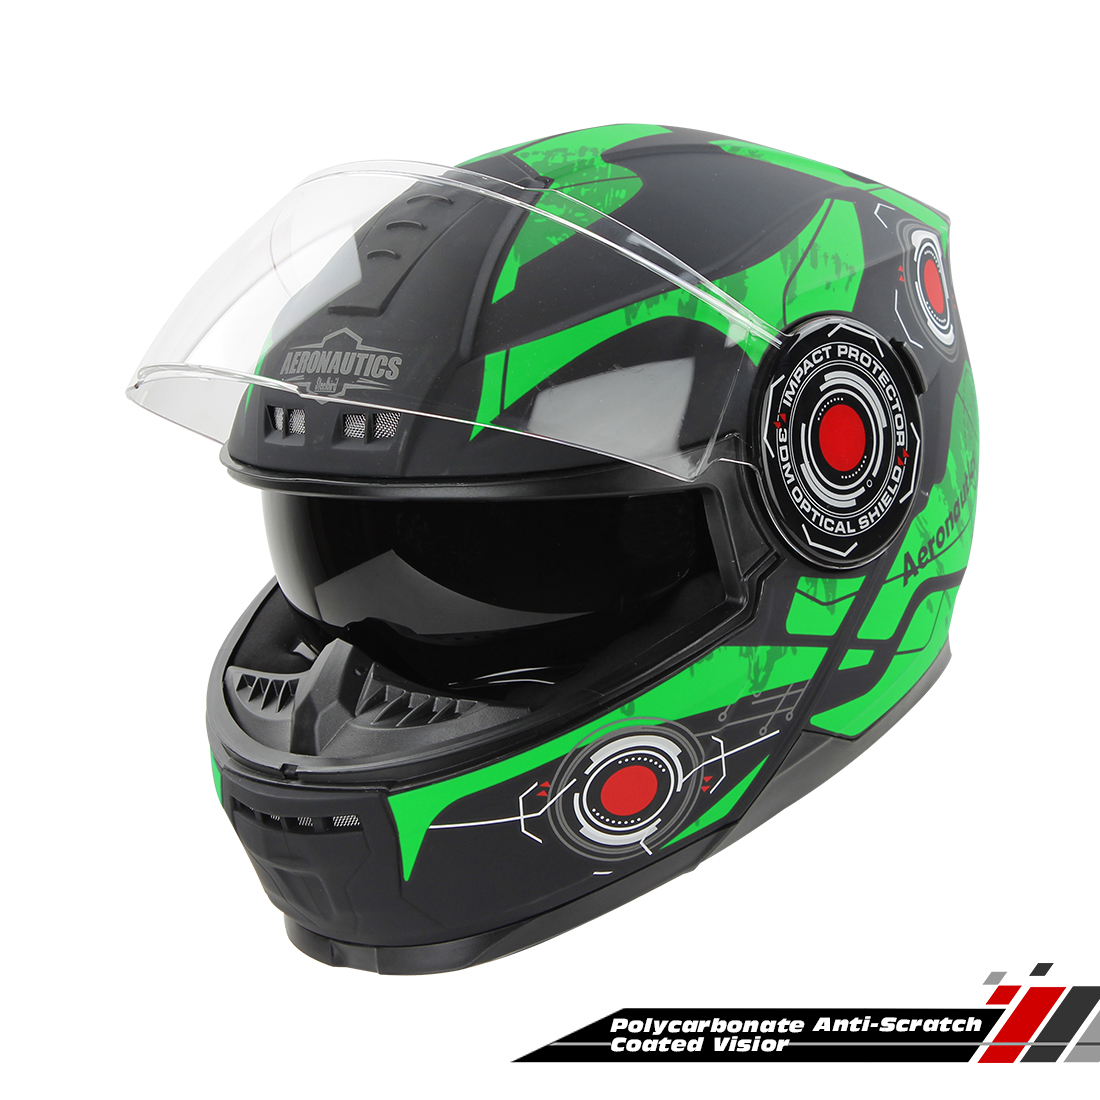 Steelbird SBH-40 Cyber ISI Certified Full Face Graphic Helmet For Men And Women With Inner Sun Shield (Glossy Black Green)